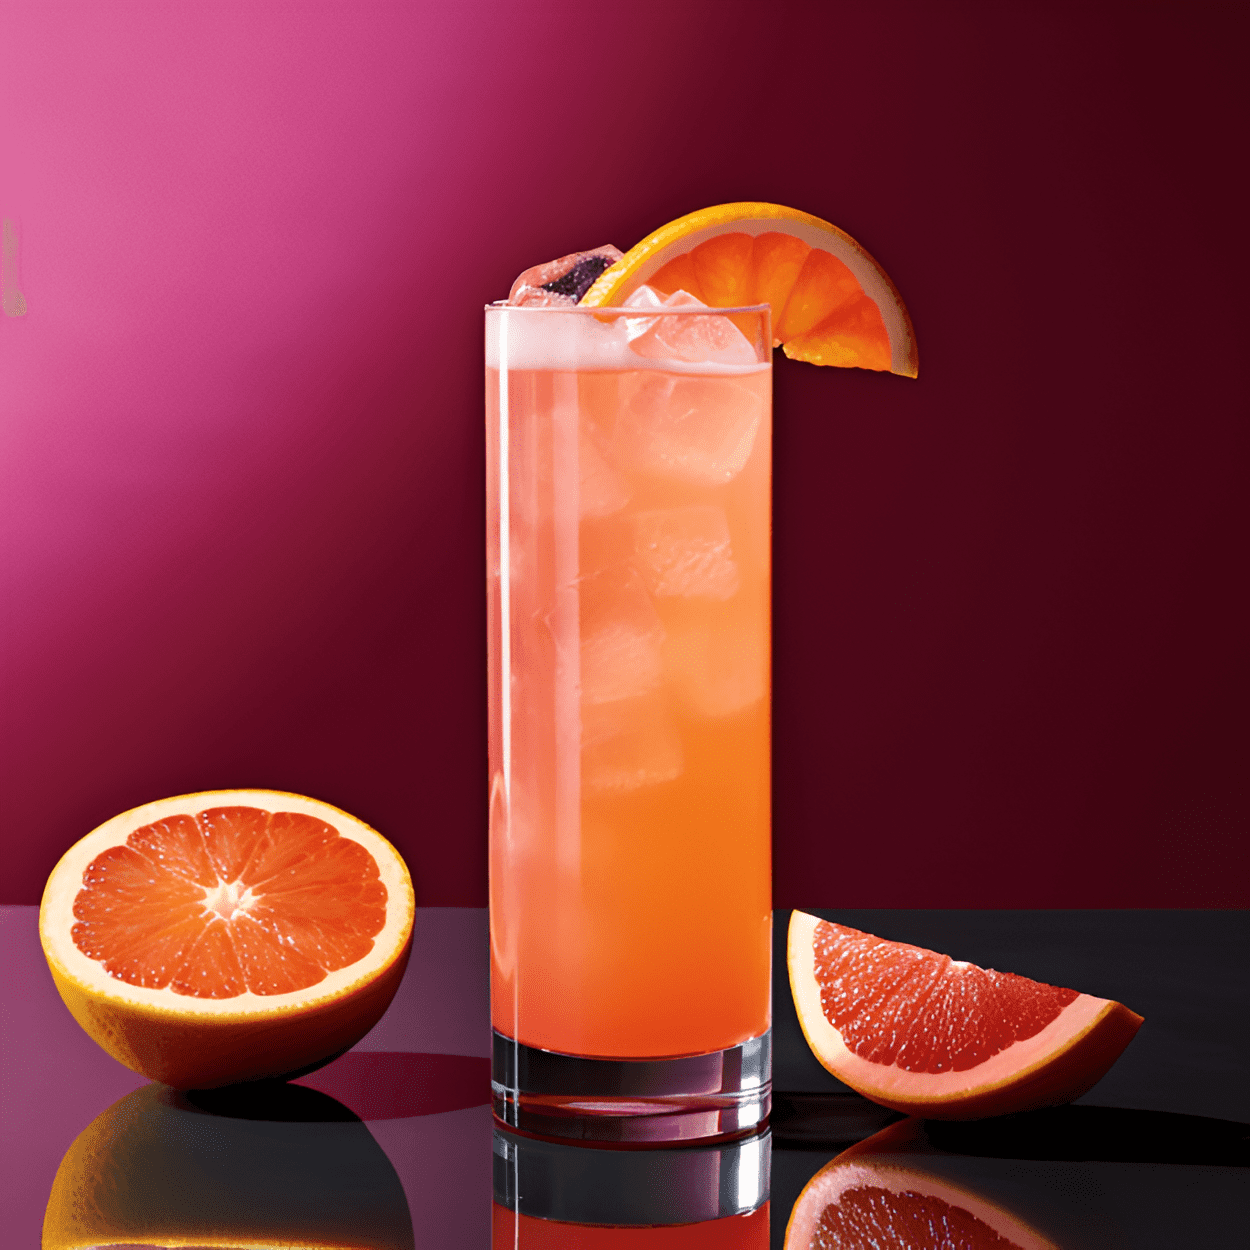 Italian Greyhound Cocktail Recipe - The Italian Greyhound is a refreshing, citrusy cocktail with a bitter edge. The sweetness of the grapefruit juice balances the bitterness of the Campari, while the vodka adds a smooth, strong undertone.